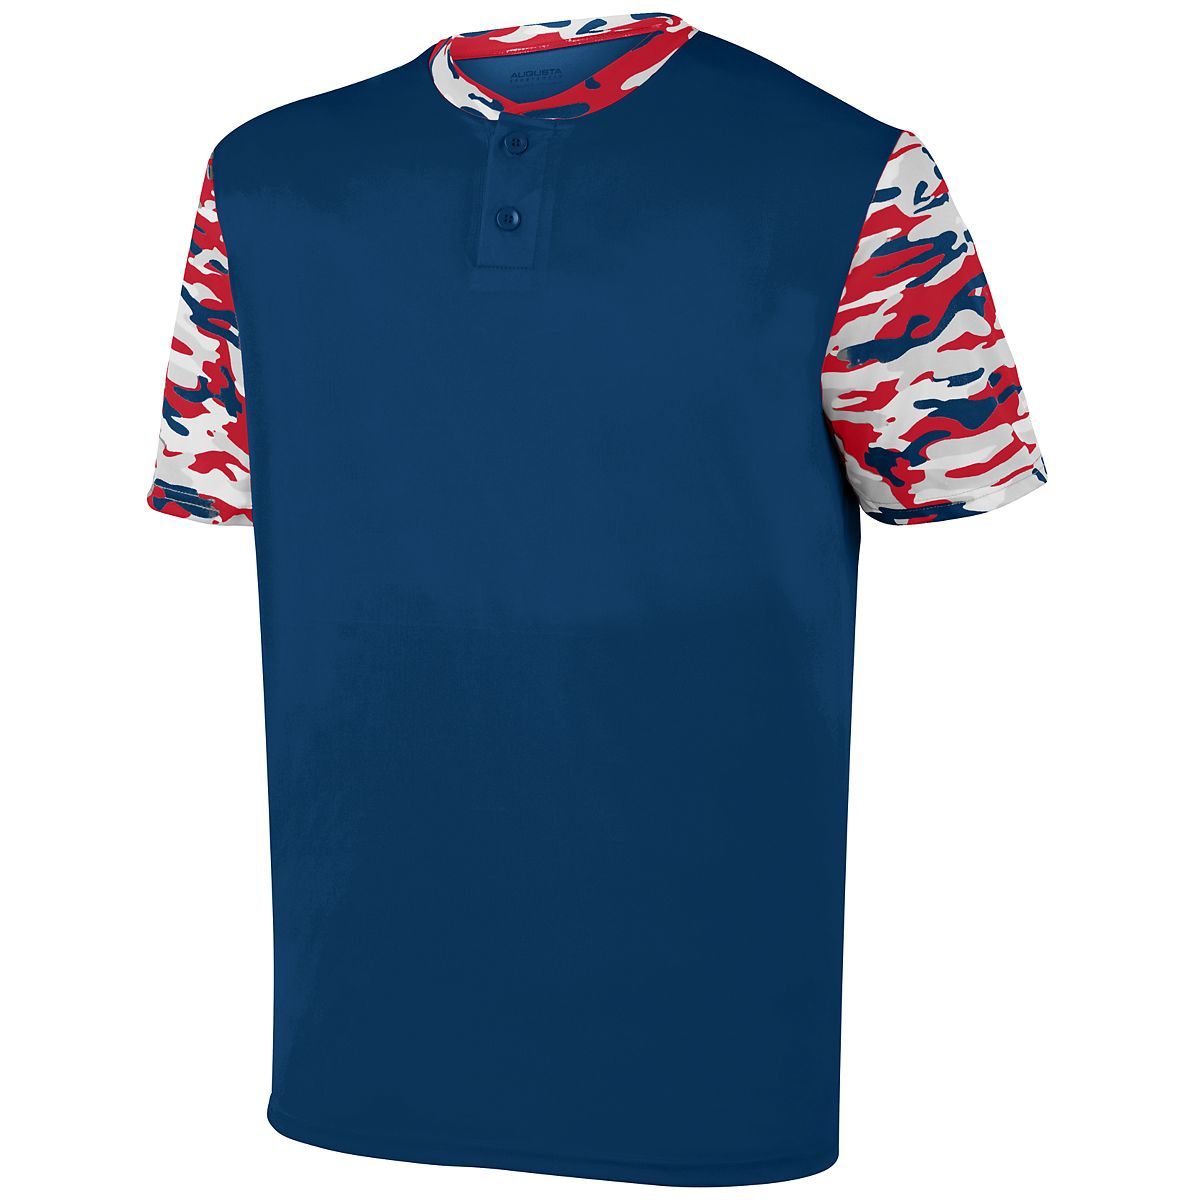 Augusta Sportswear Pop Fly Jersey in Navy/Red Navy Mod  -Part of the Adult, Adult-Jersey, Augusta-Products, Baseball, Shirts, All-Sports, All-Sports-1 product lines at KanaleyCreations.com